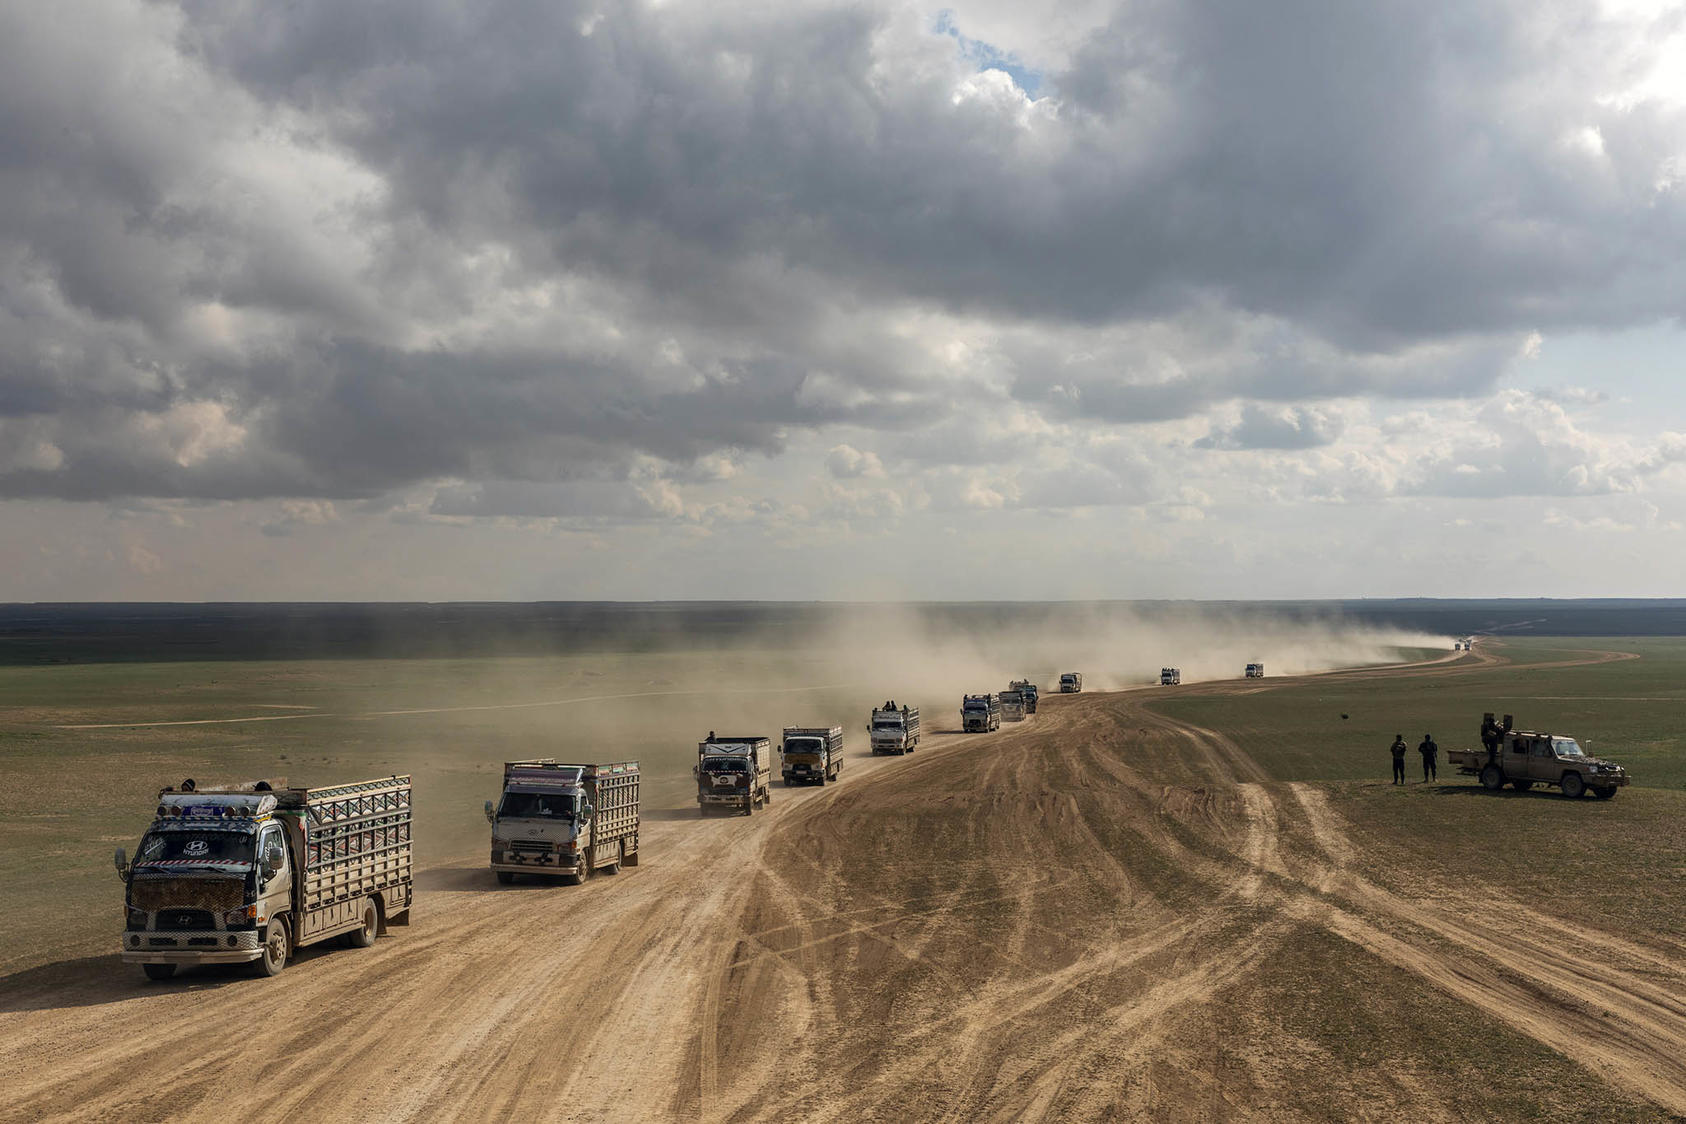 A convoy of trucks carrying people to detention camps on Nov. 2, 2019 after they had fled areas held by the Islamic State in eastern Syria. (Ivor Prickett/The New York Times)